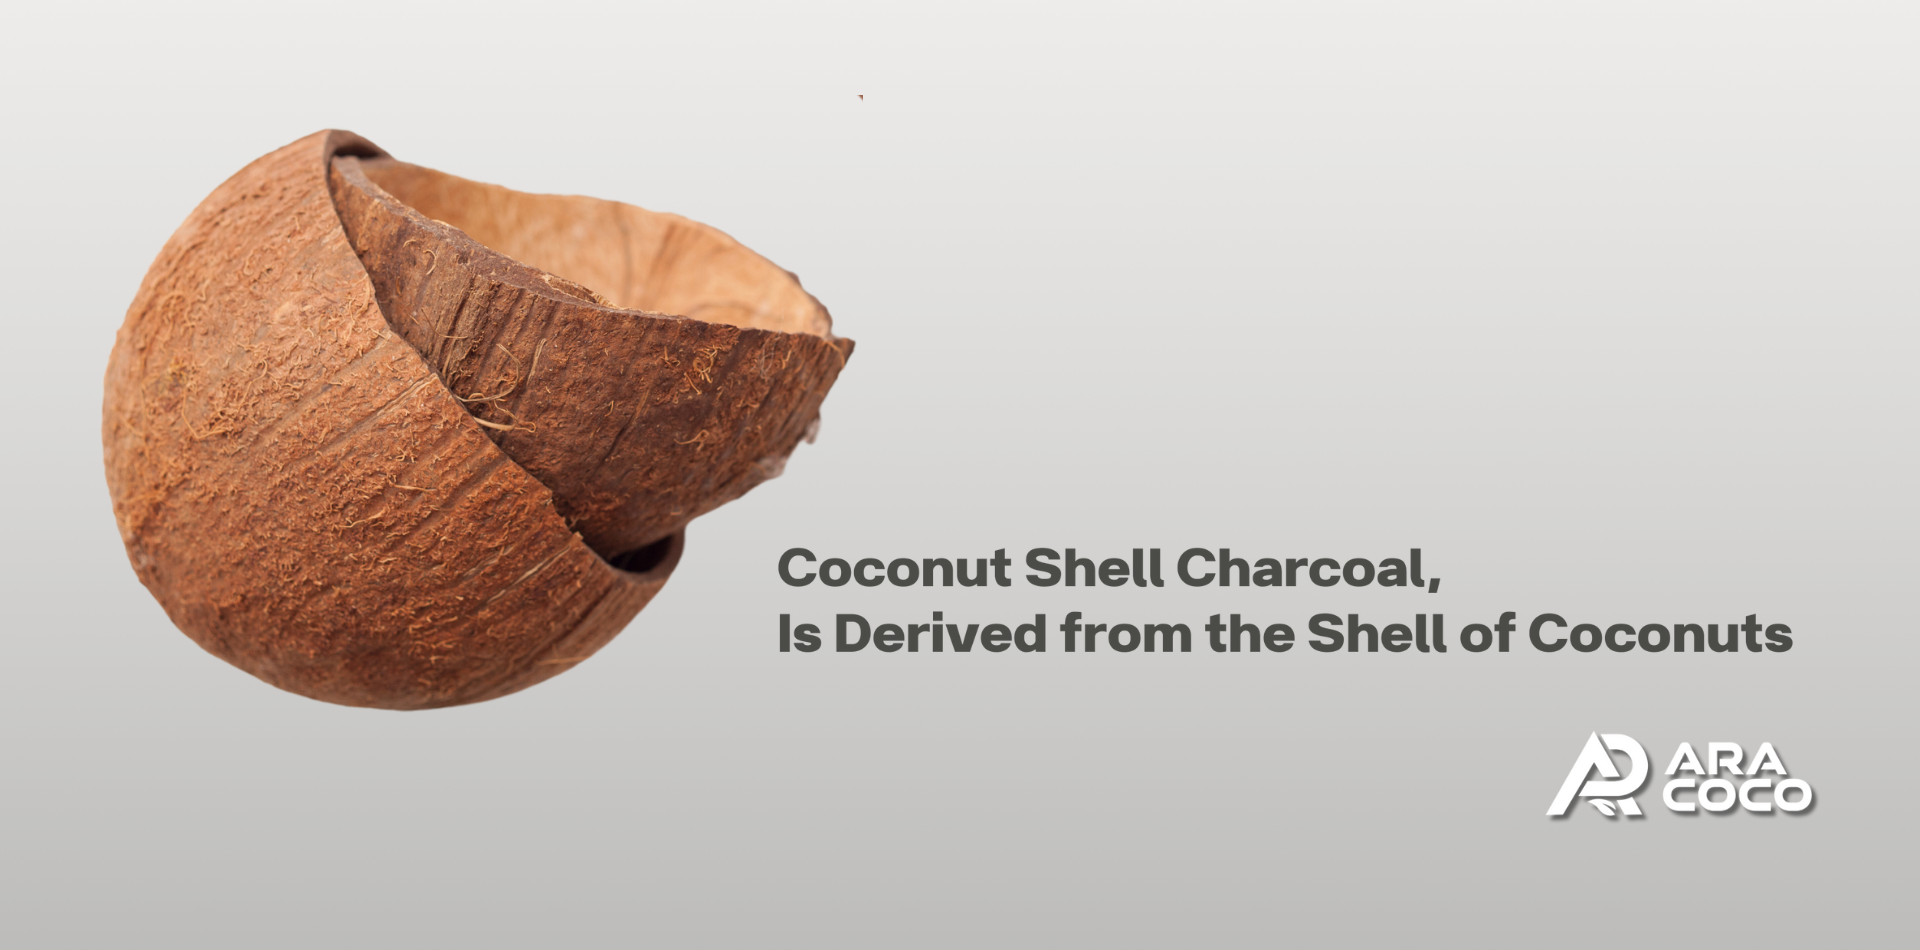 Coconut shell charcoal, as the name suggests, is derived from the shell of coconuts